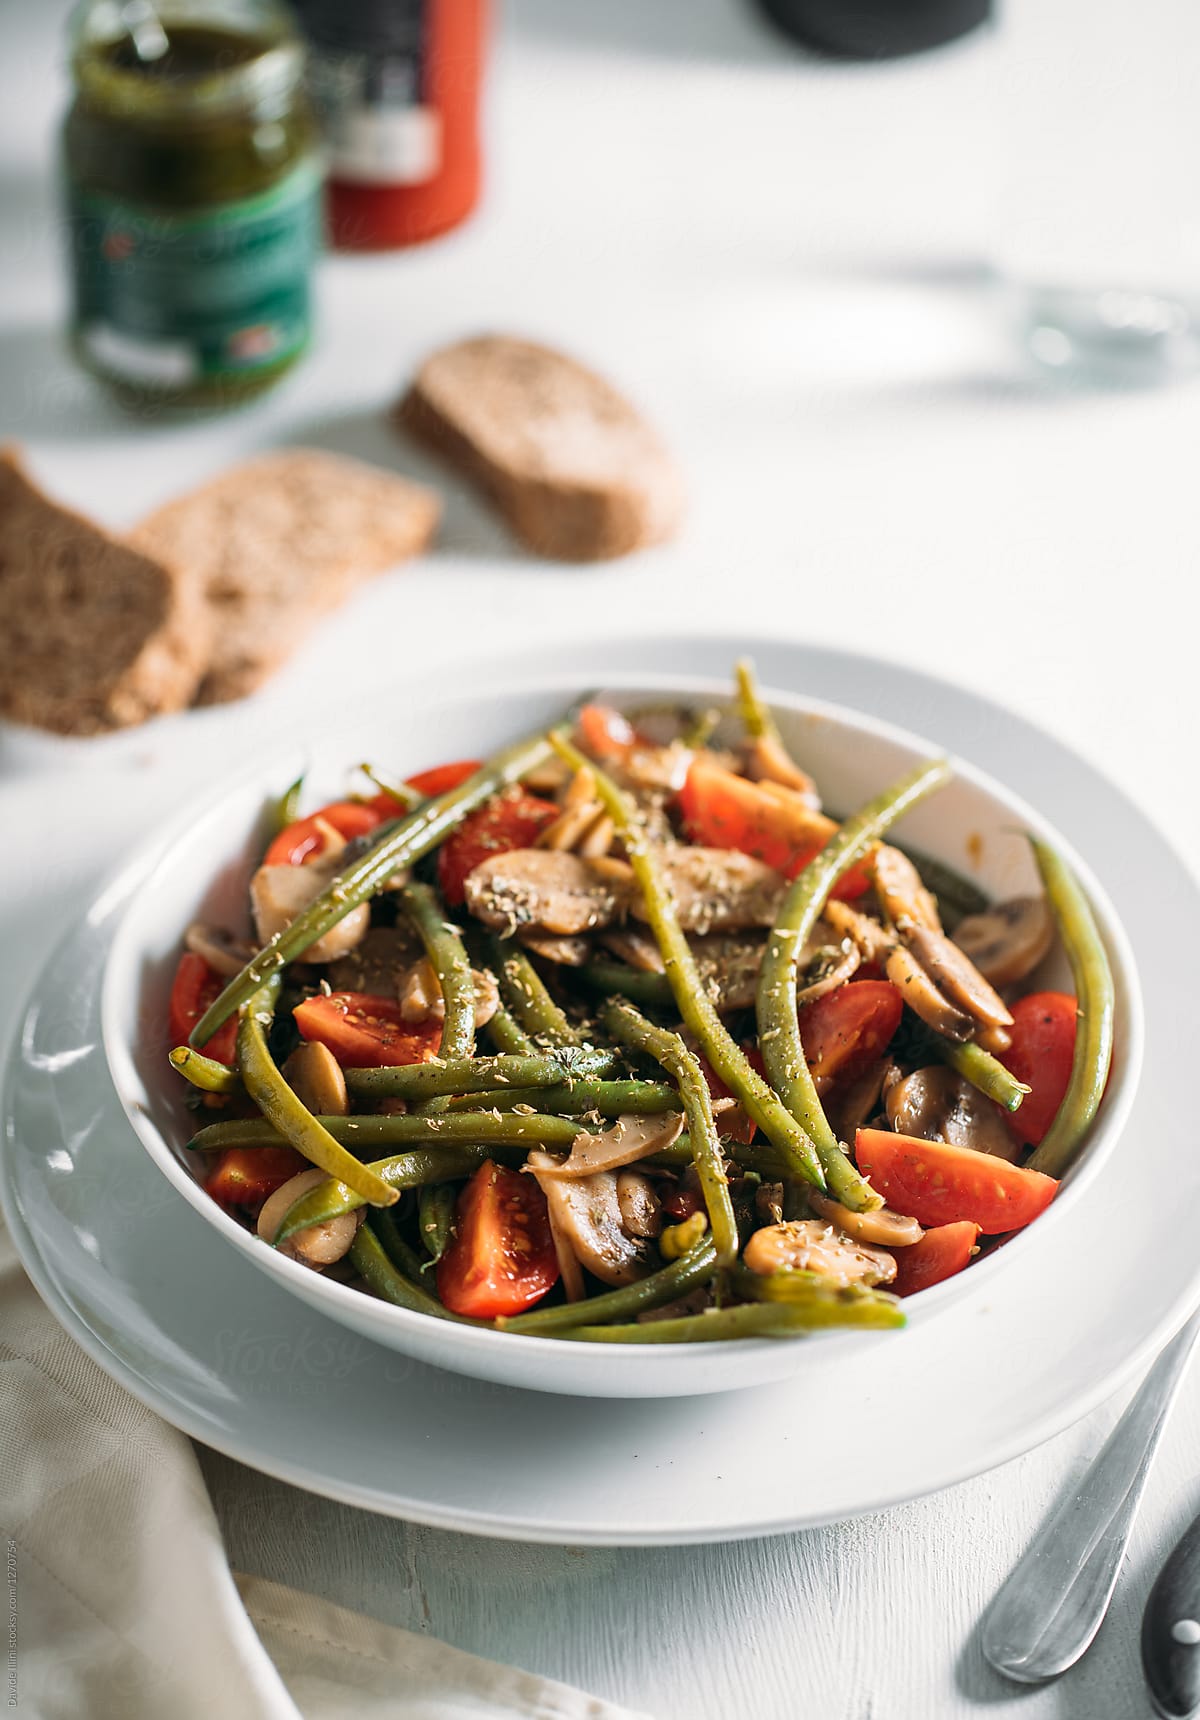 Salad with green beans, mushrooms and tomatoes